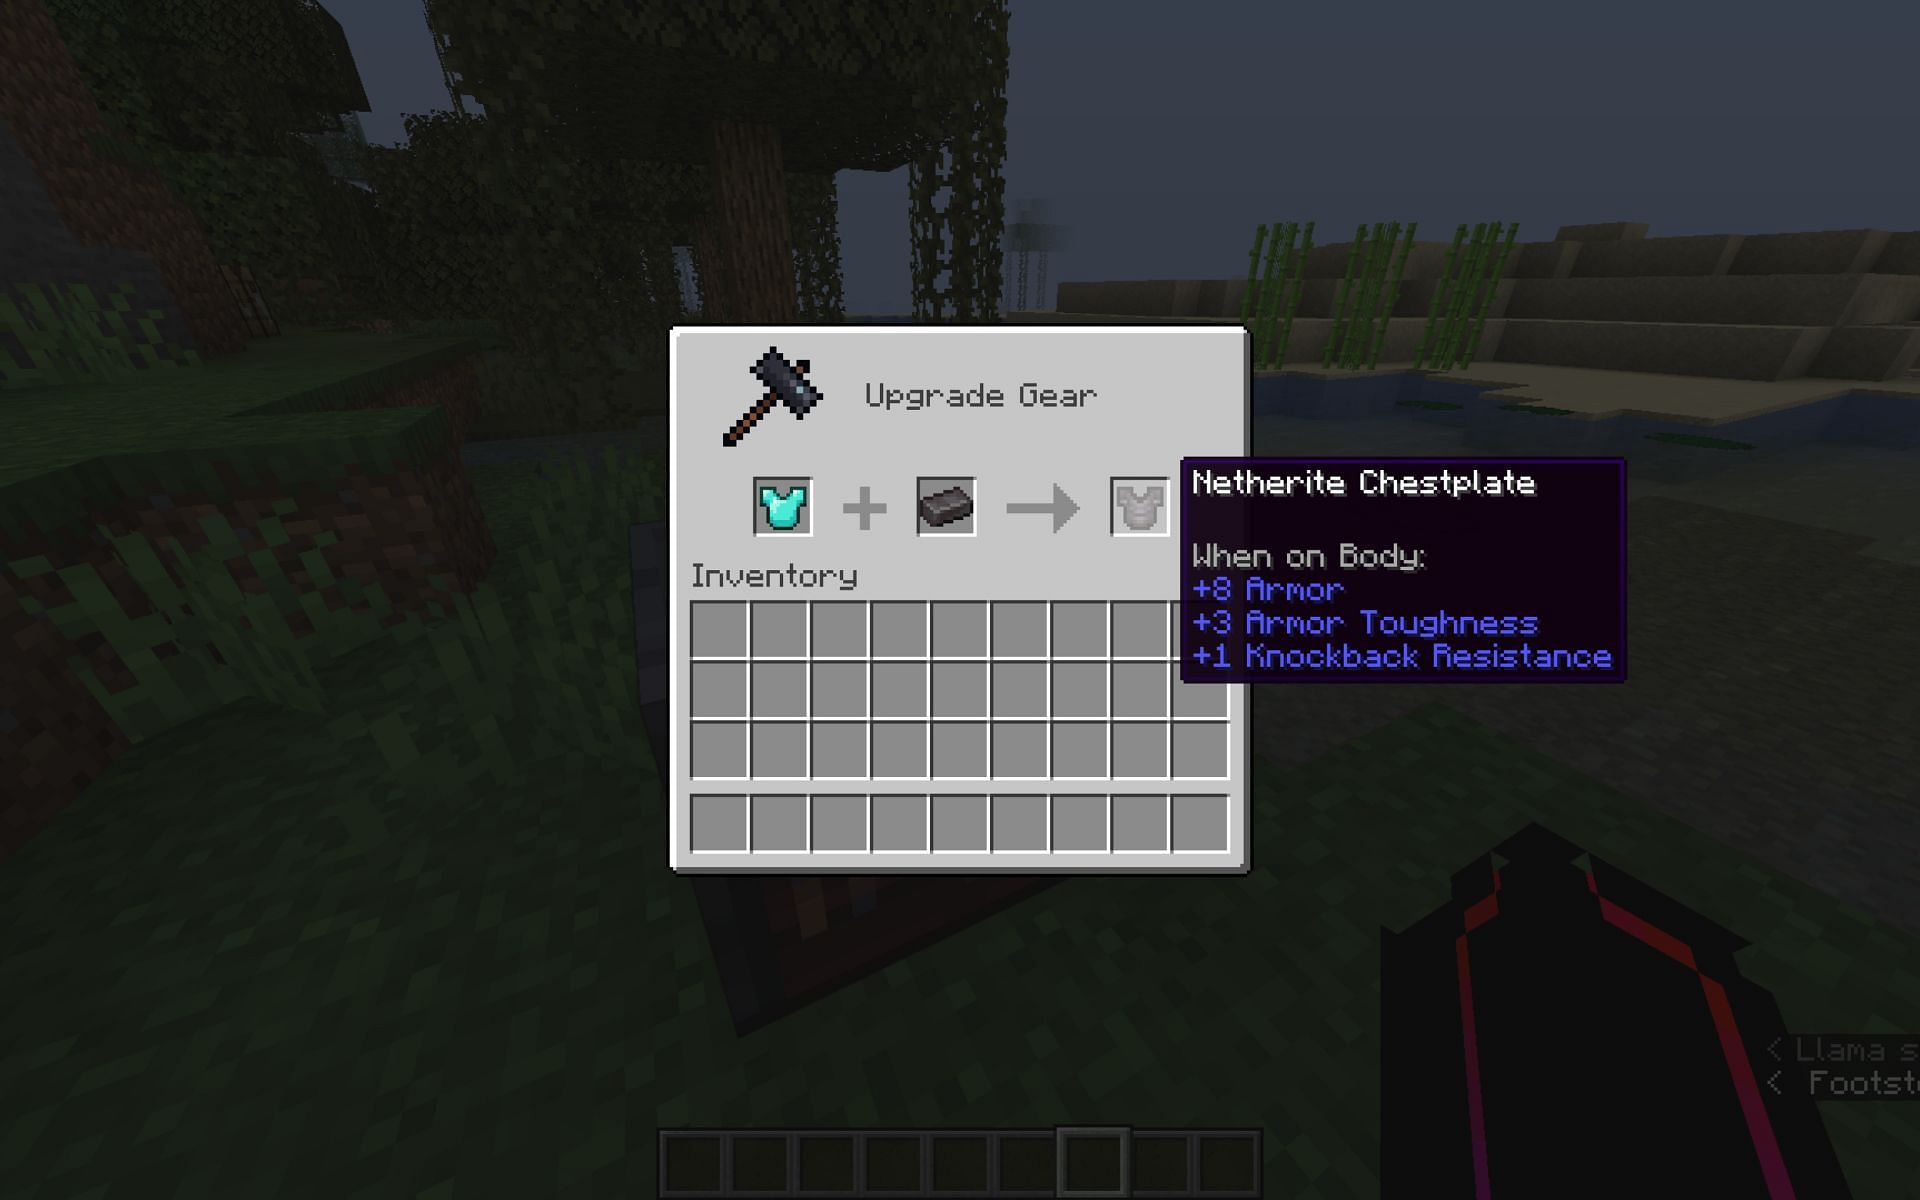 minecraft-armor-trims-how-to-find-and-use-smithing-templates